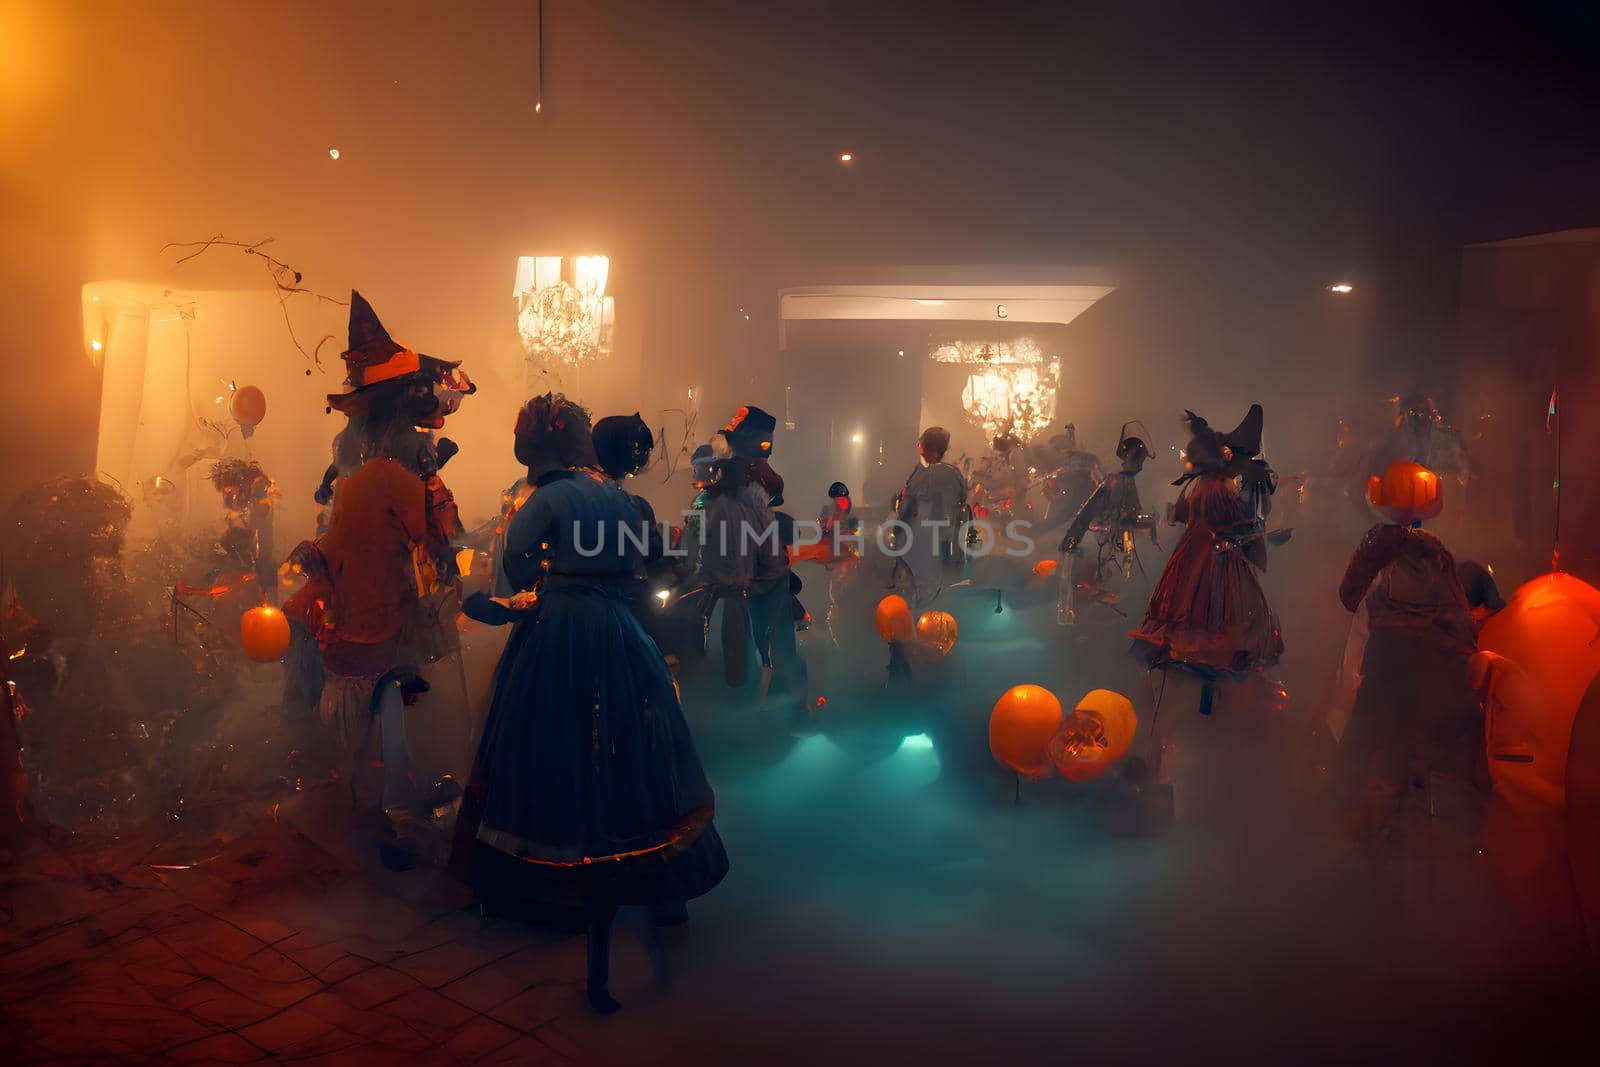 halloween decorated home costumed party in interior with smoke or fog, neural network generated art. Digitally generated image. Not based on any actual scene or pattern.